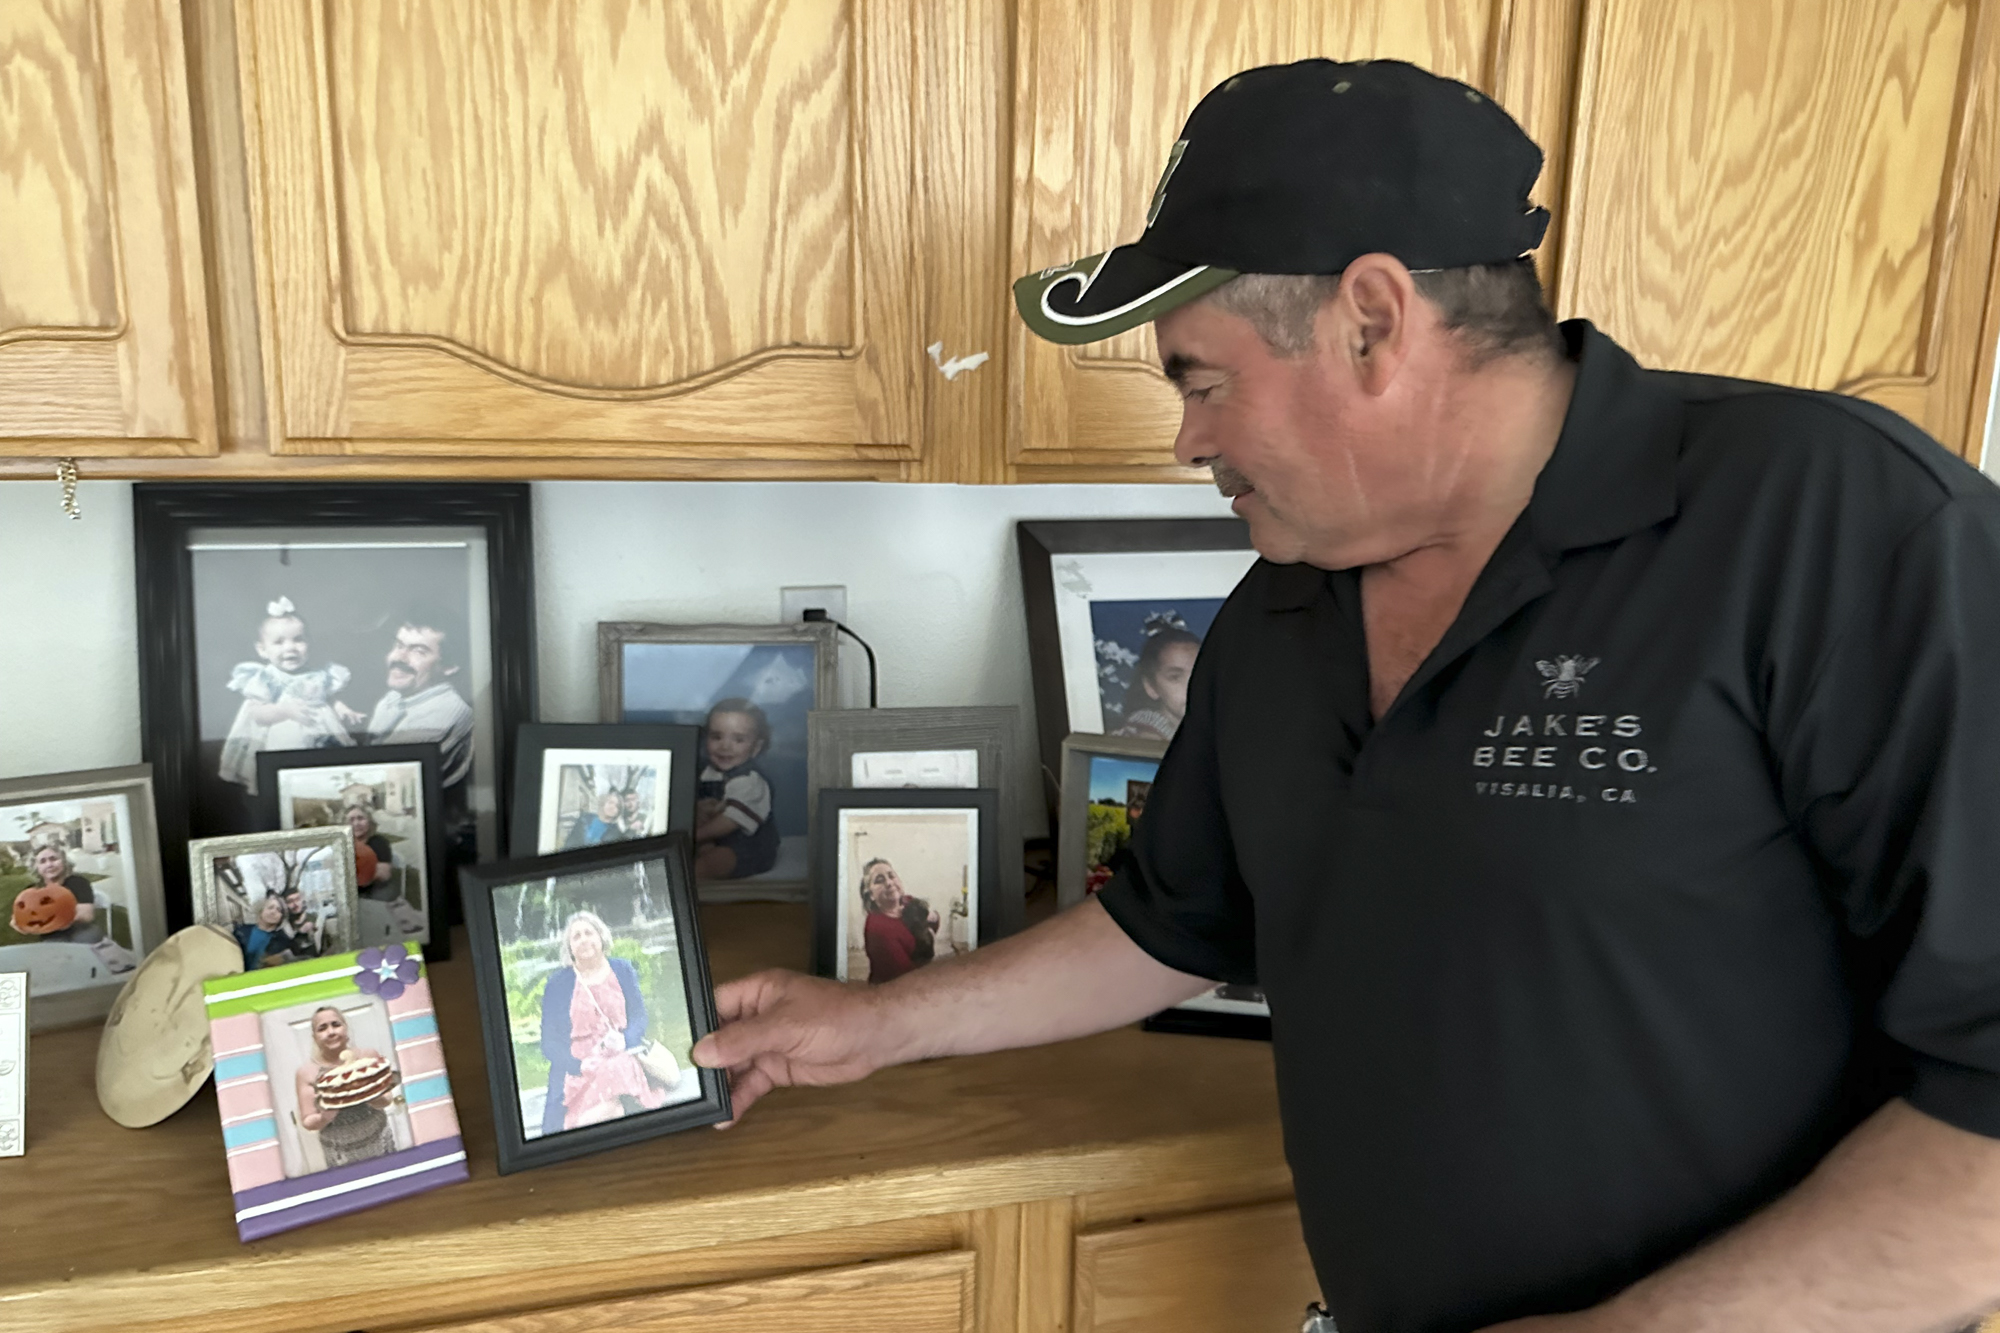 A person in a baseball cap looks at photos on a shelf inside a home.